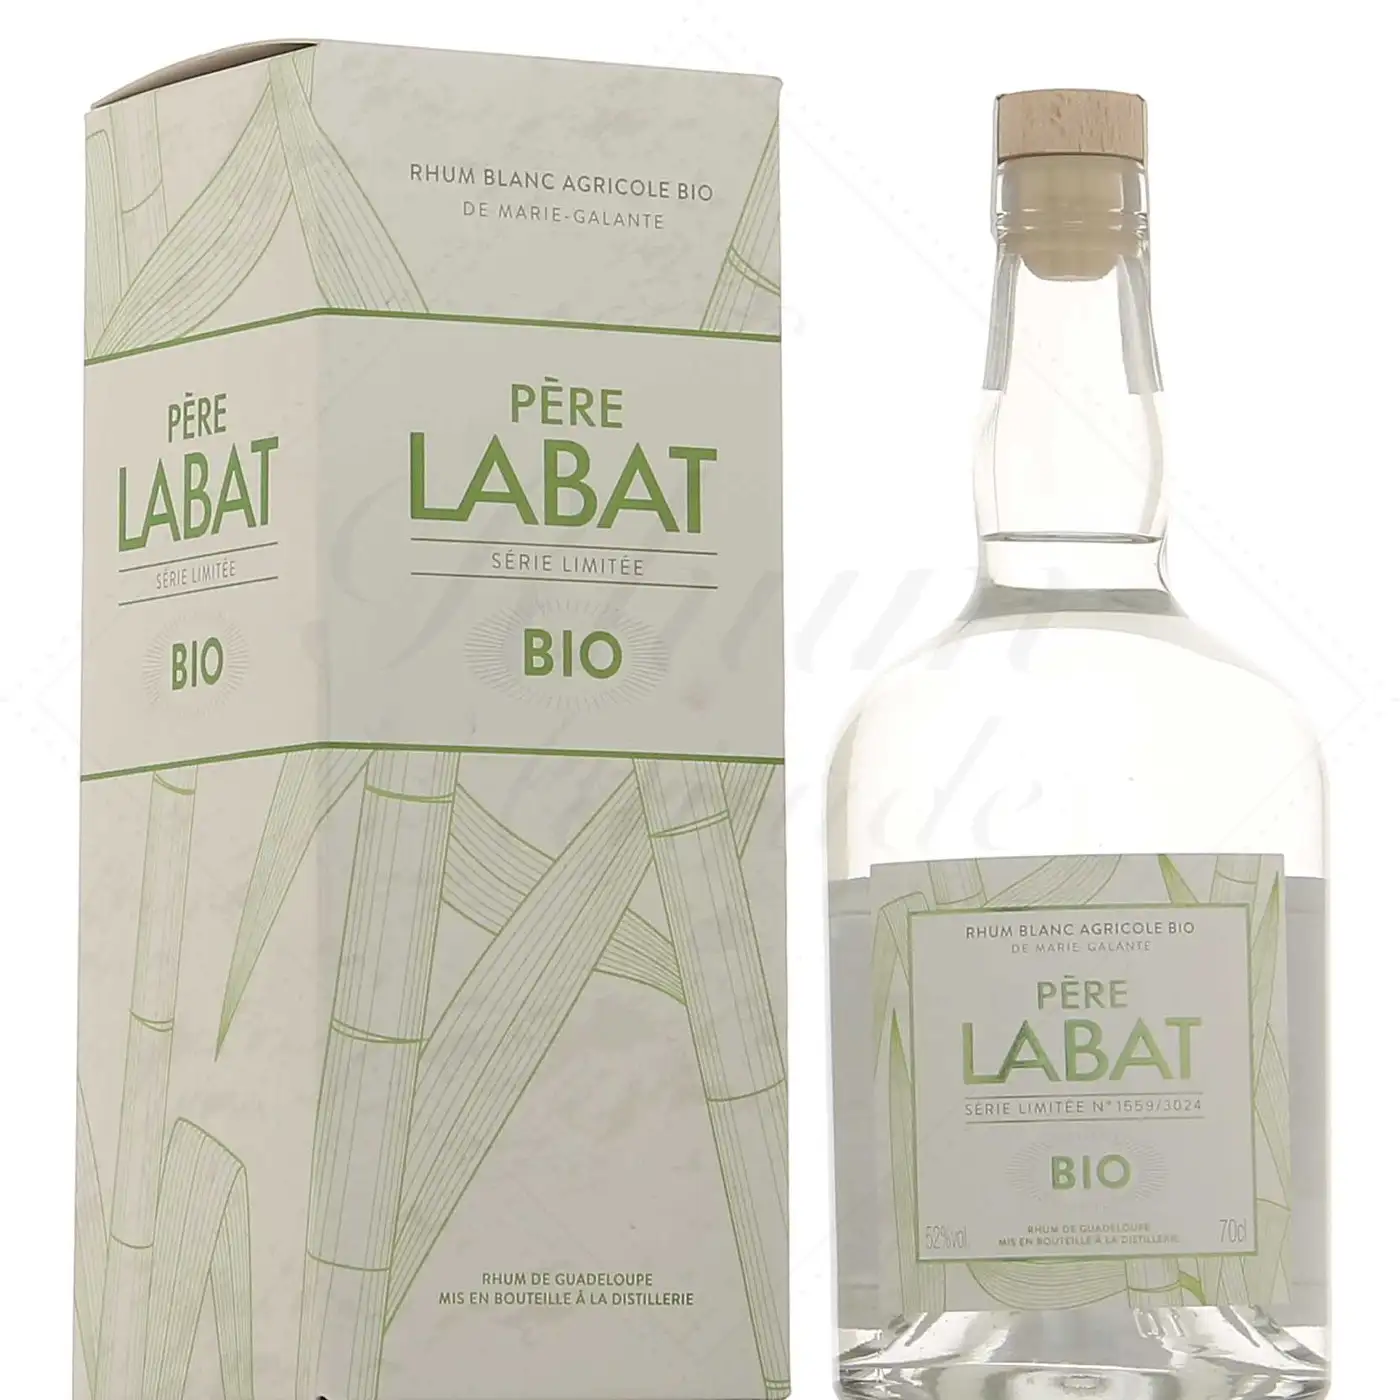 Image of the front of the bottle of the rum Père Labat BIO